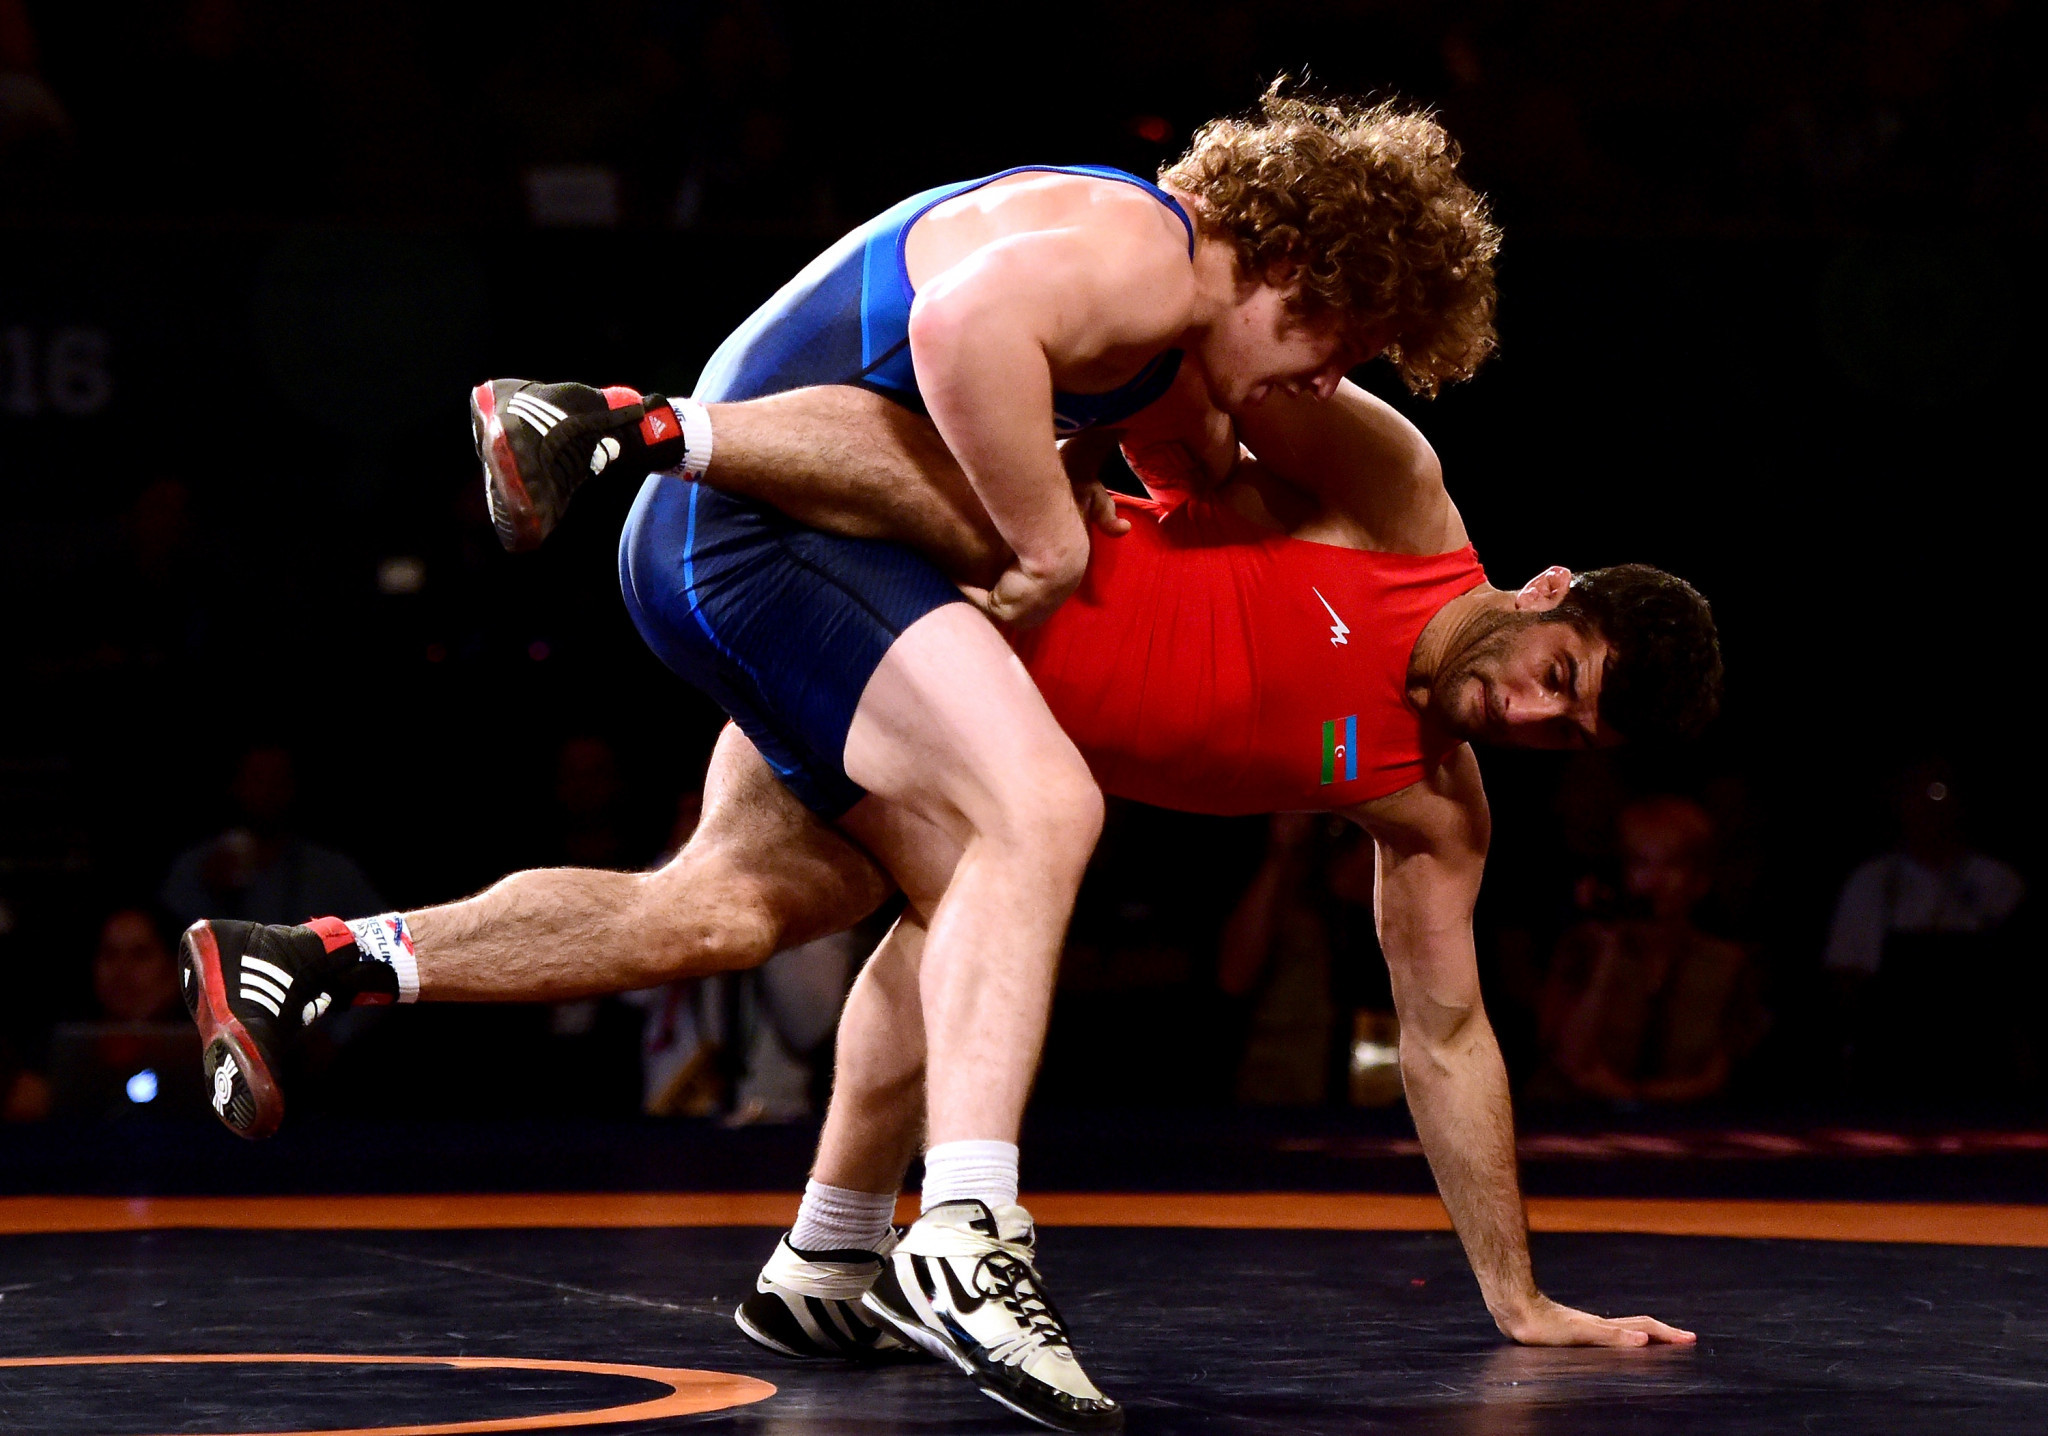 The Under-23 Wrestling World Championships have been cancelled due to COVID-19 ©Getty Images